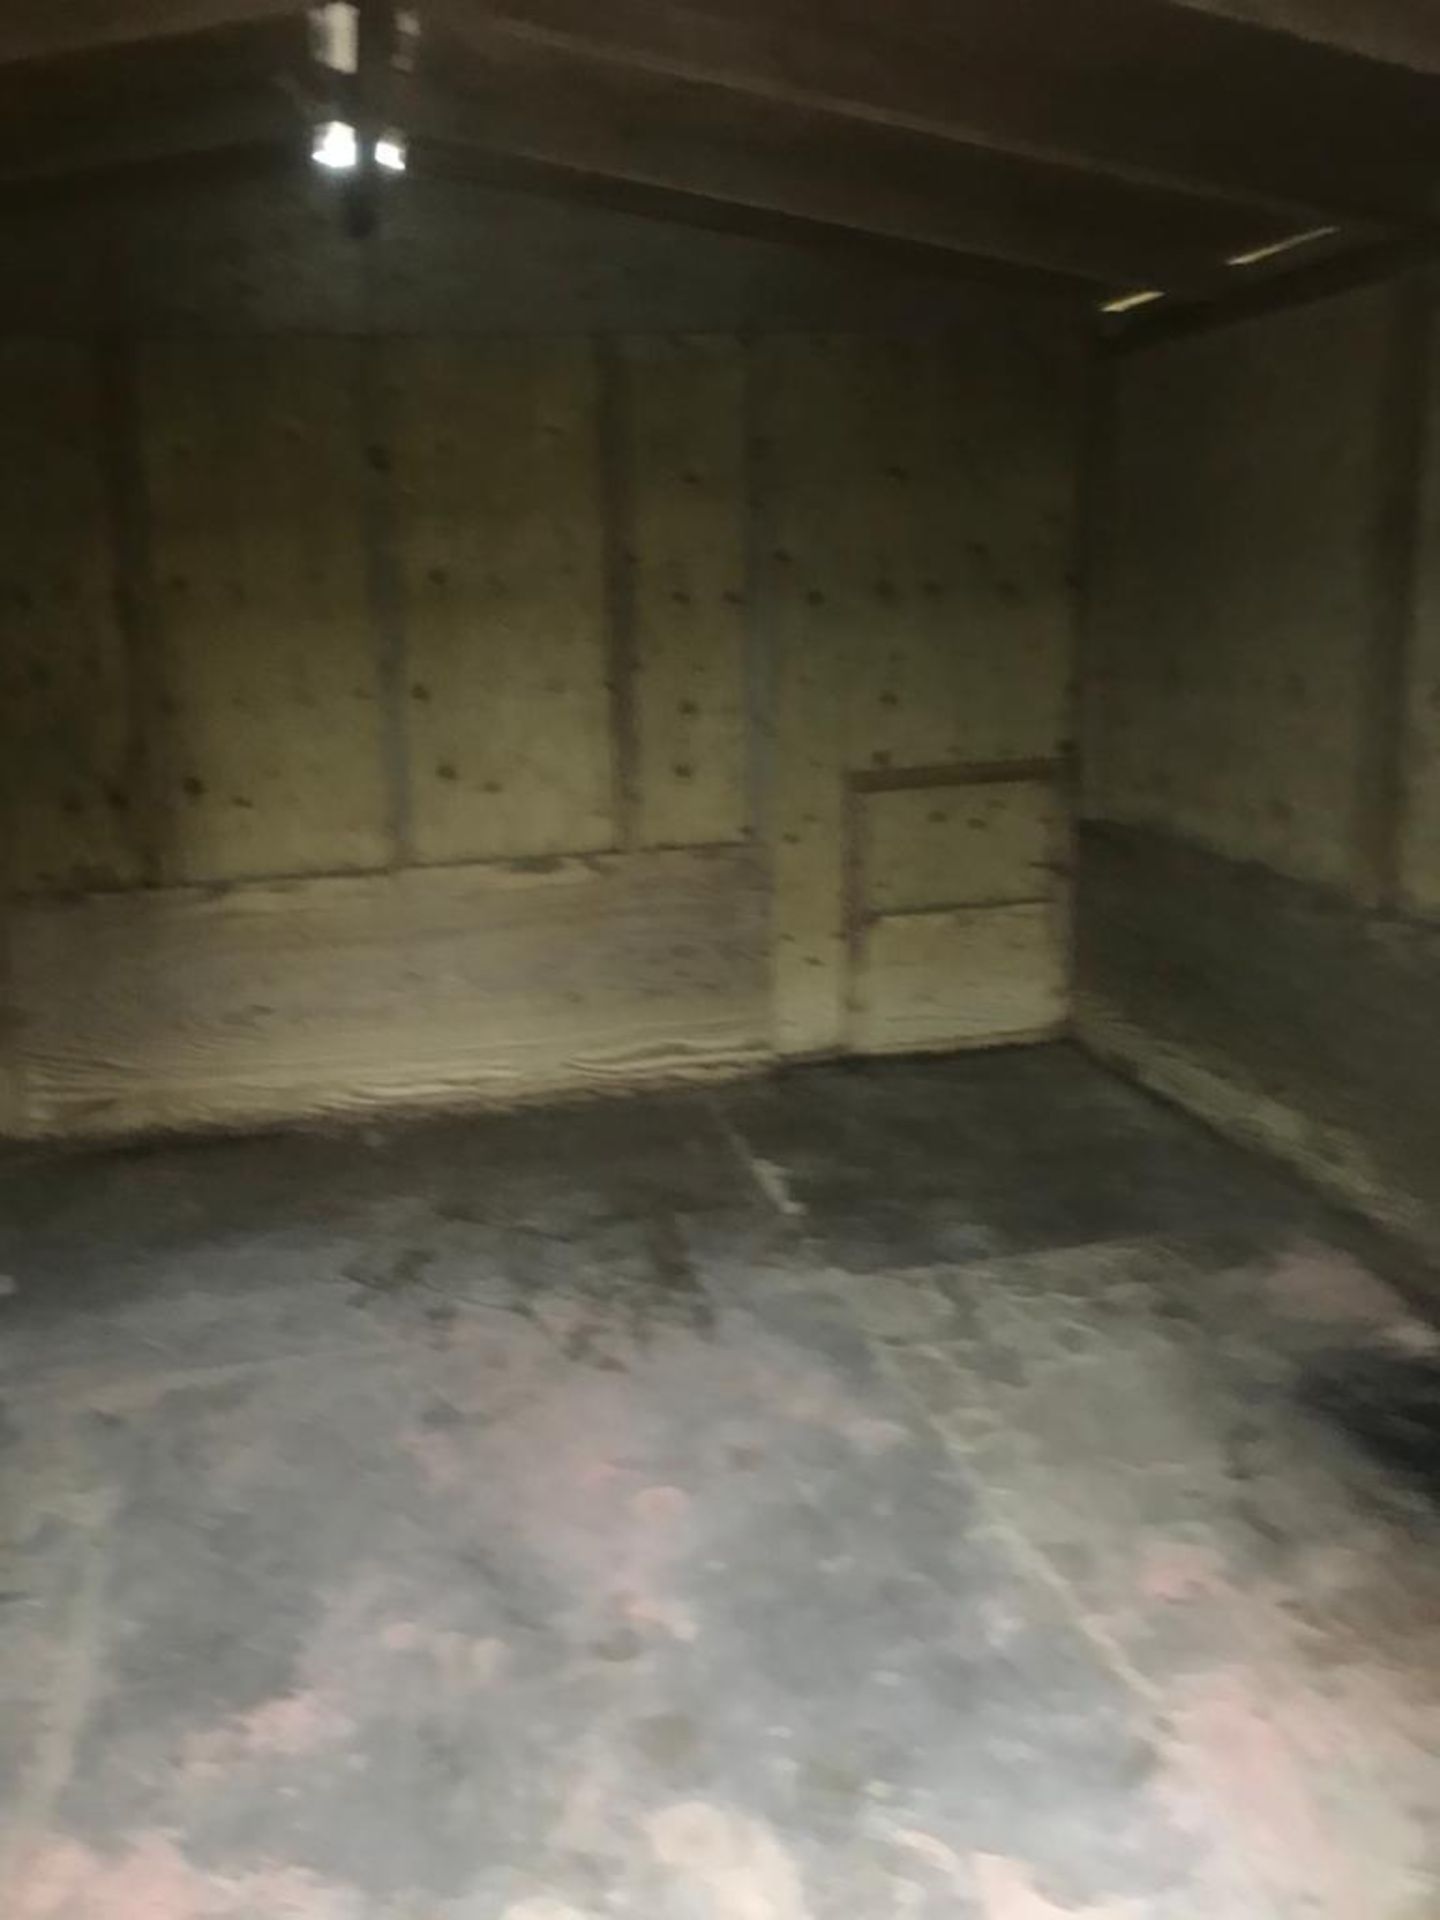 1 x 12 x 12 Brooder Hut 6ft to eave including floors BUYER TO DISMANTLE - Image 2 of 4